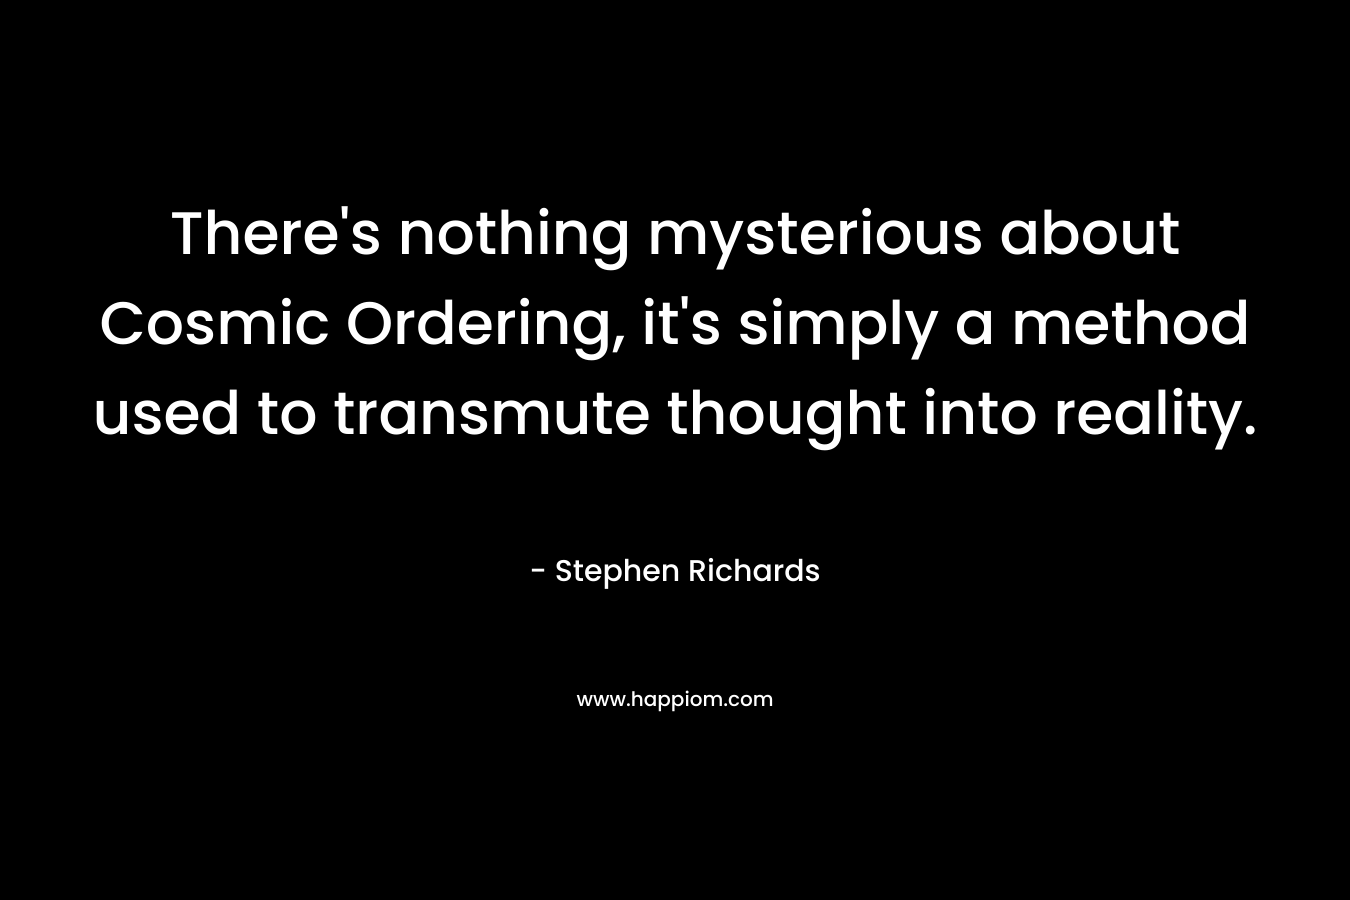 There's nothing mysterious about Cosmic Ordering, it's simply a method used to transmute thought into reality.